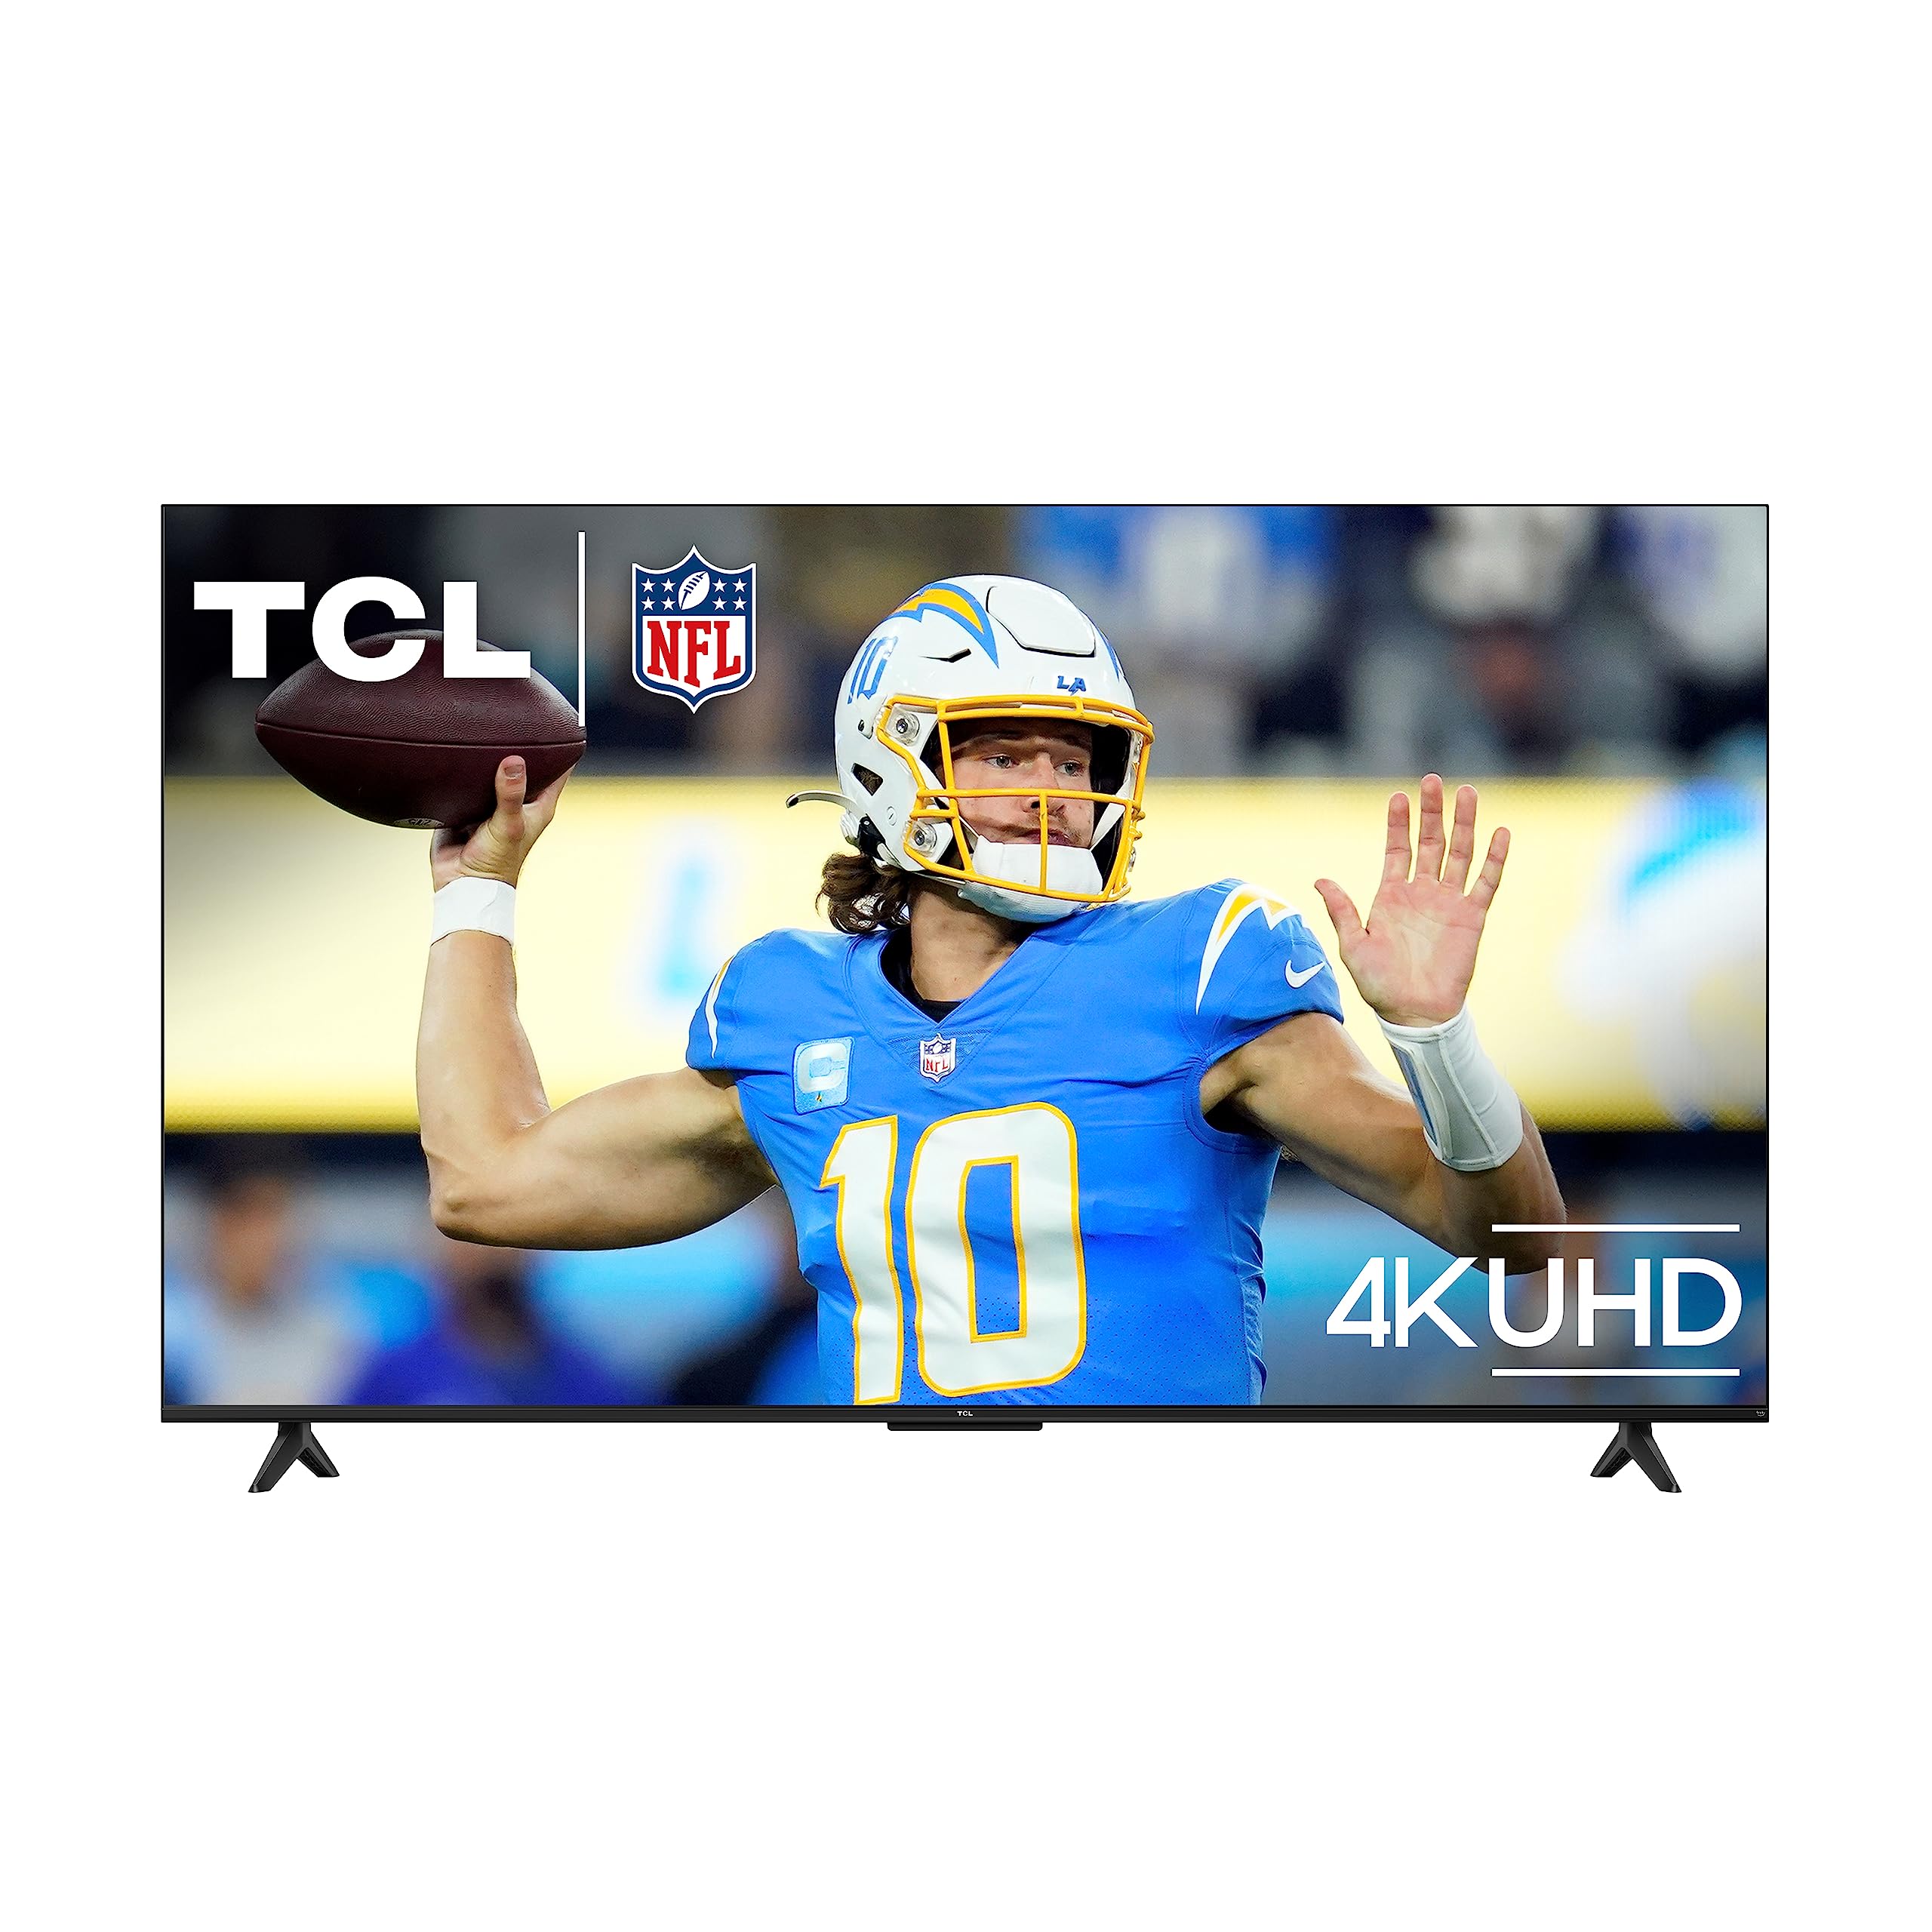 TCL 50-Inch Class S4 4K LED Smart TV with Fire TV (50S450F, 2023 Model), Dolby Vision HDR, Dolby Atmos, Alexa Built-in, Apple Airplay Compatibility, Streaming UHD Television, Black